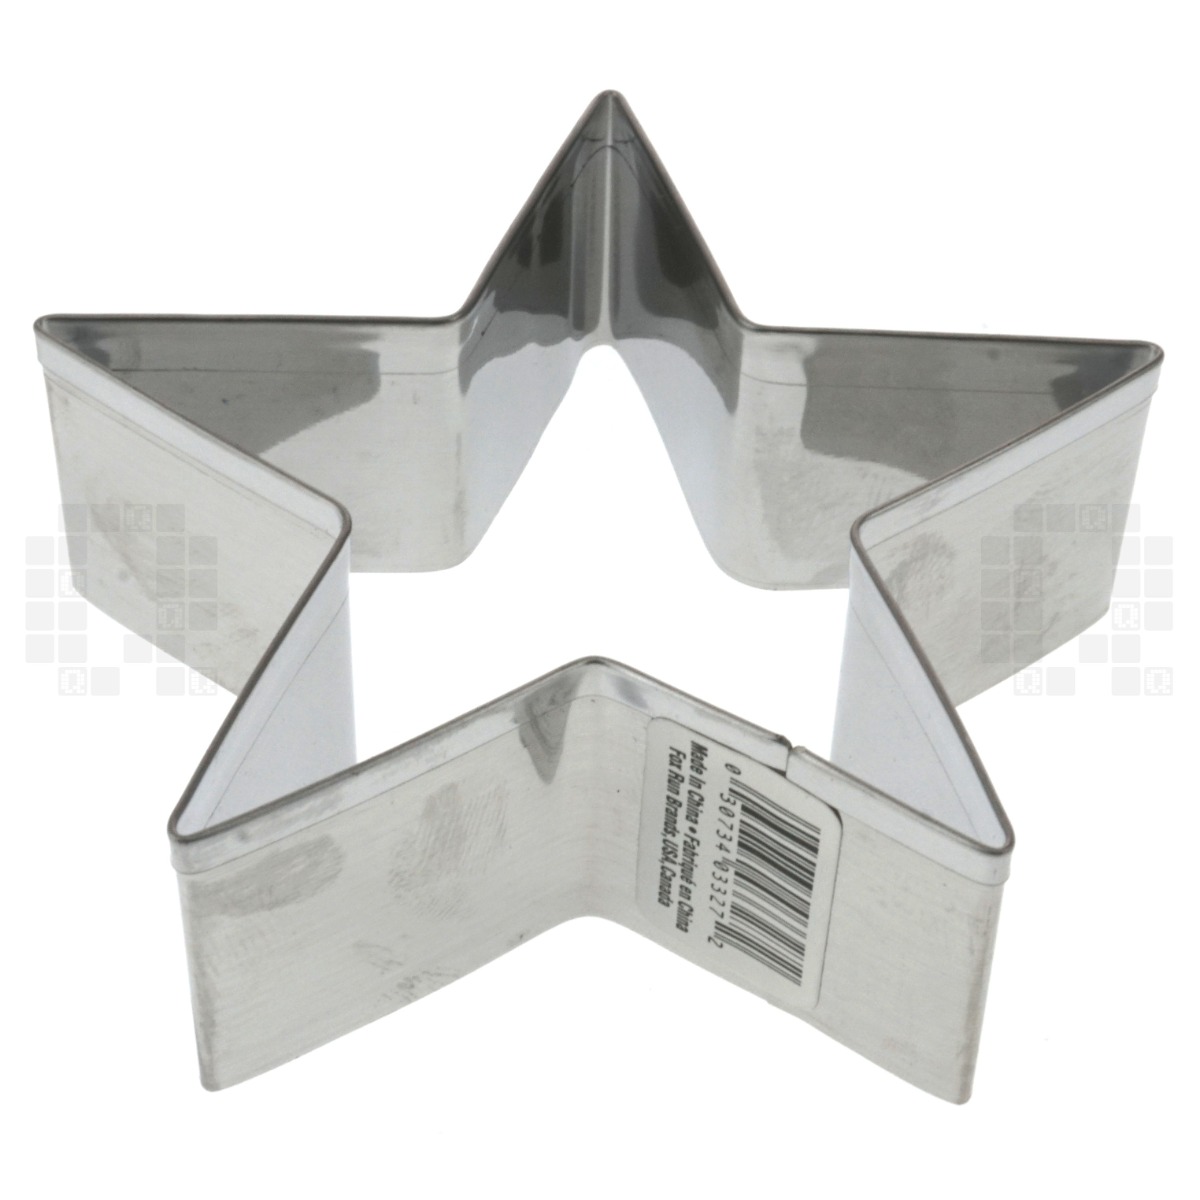 Fox Run Brands 3327 3" 5 Pointed Star Stainless Steel Pastry Cookie Cutter